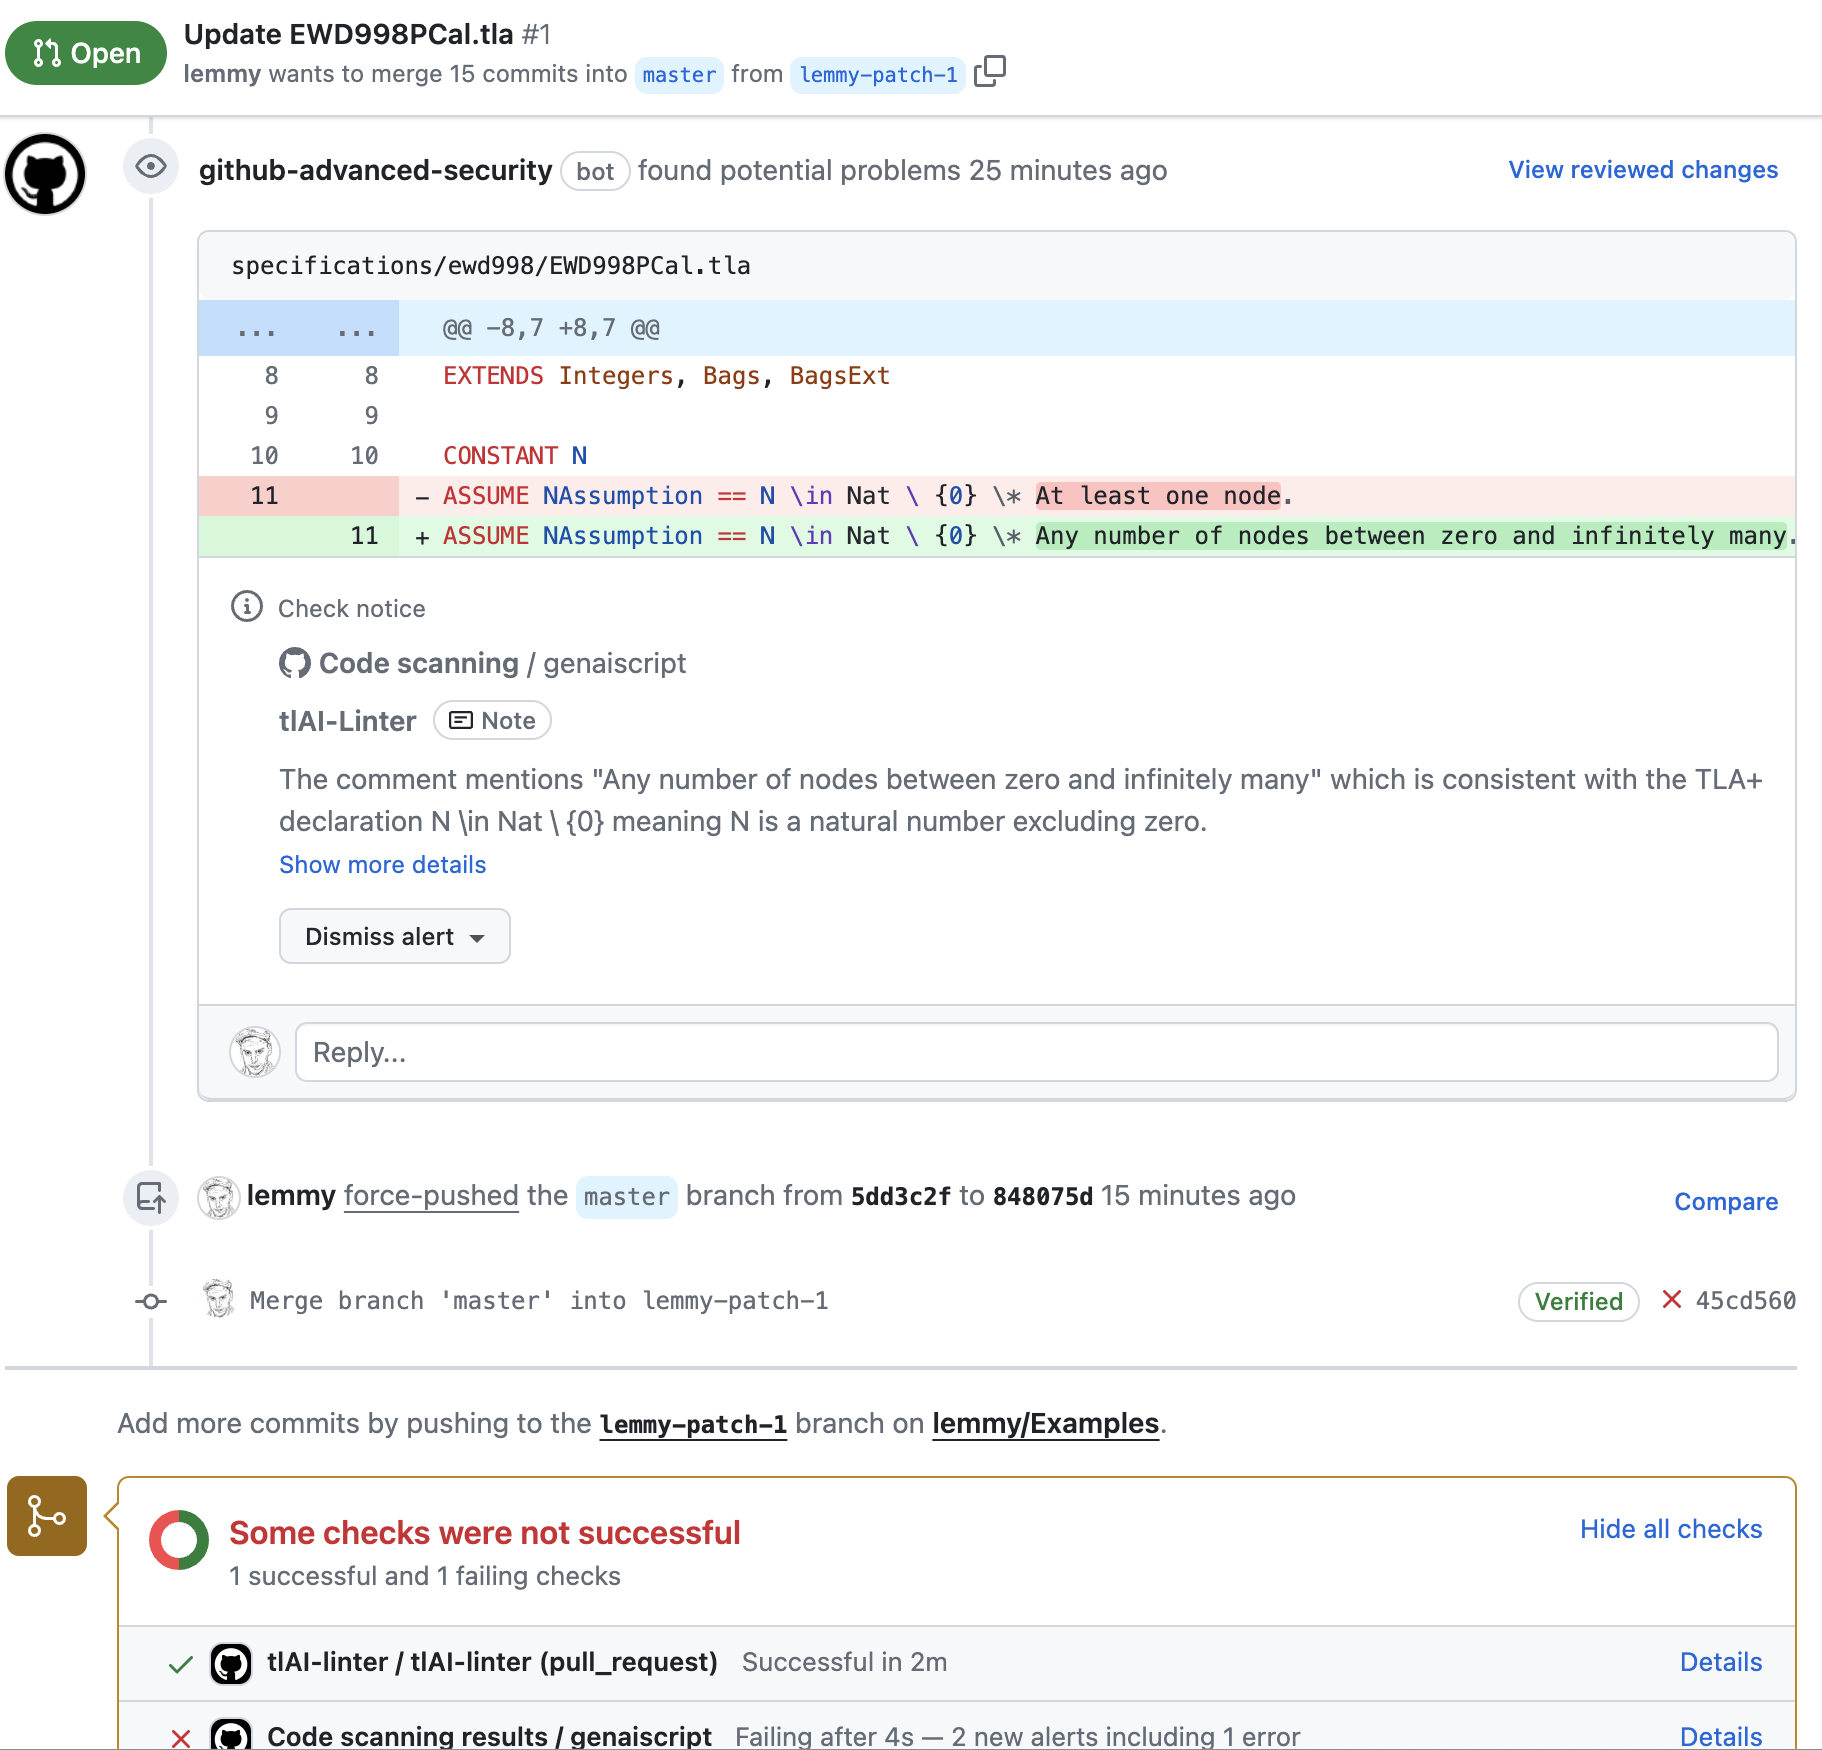 The image shows a screenshot of a GitHub pull request page. The pull request is titled "Update EDW998PCal.tla #1" and is from a branch named "lemmy-patch-1" into the "master" branch. A bot identified as "github-advanced-security" has flagged potential problems 25 minutes ago. Below, part of a file is shown with a diff view highlighting changes between two versions. Two lines have been altered, where an "ASSUME" statement's comment has been updated from "At least one node" to "Any number of nodes between zero and infinitely many." There's an alert from the TLA+ Linter indicating that the comment is consistent with the TLA+ declaration `N \in Nat \ {0}` which means N is a natural number excluding zero.

Below this, there is a dismissible alert box titled "Check notice" with a "Dismiss alert" button. At the bottom of the screenshot, there's a note that "Some checks were not successful," indicating 1 successful check and 1 failing check. The successful check is by "TLA-linter / TLA-linter (pull_request)" and the failing check is "Code scanning results / genaiscript." There's also a reference to a commit push action to the "master" branch from another branch and a prompt suggesting to add more commits by pushing to the "lemmy-patch-1" branch on "lemmy/Examples".